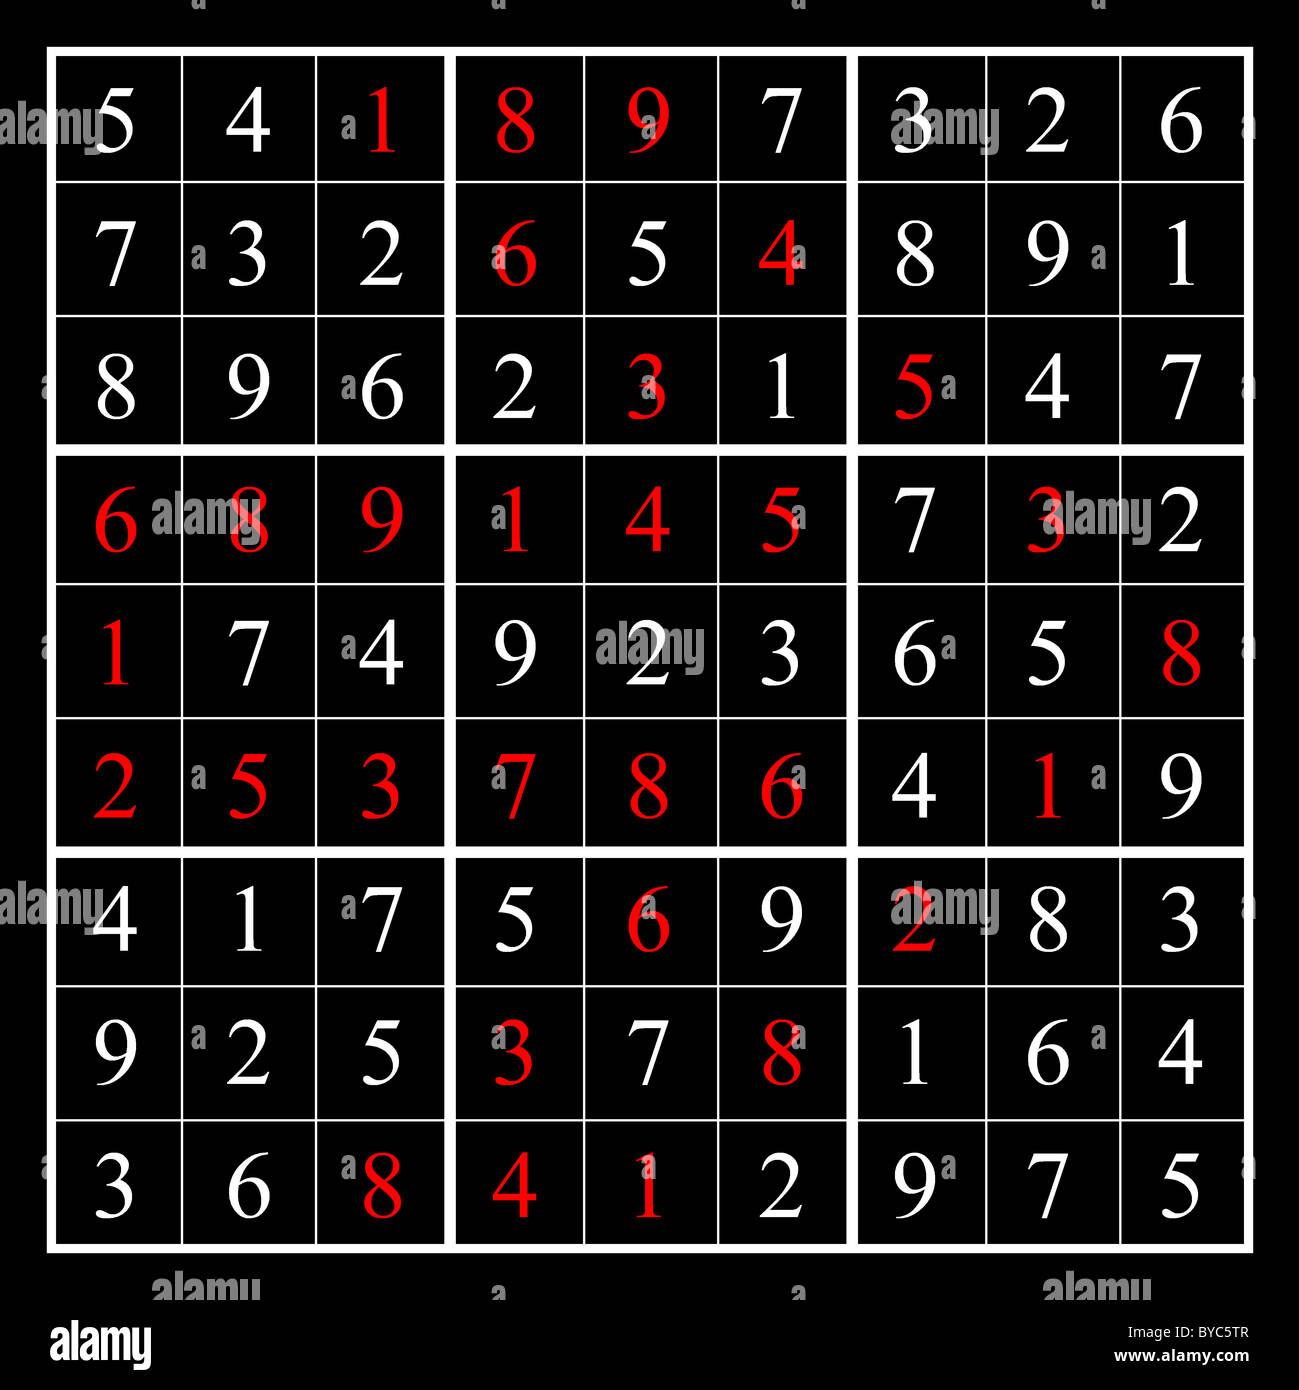 This is the solution to a sudoku puzzle - on Alamy as BYC5TN - in the form of a right facing arrow, as shown by the red numbers. Stock Photo